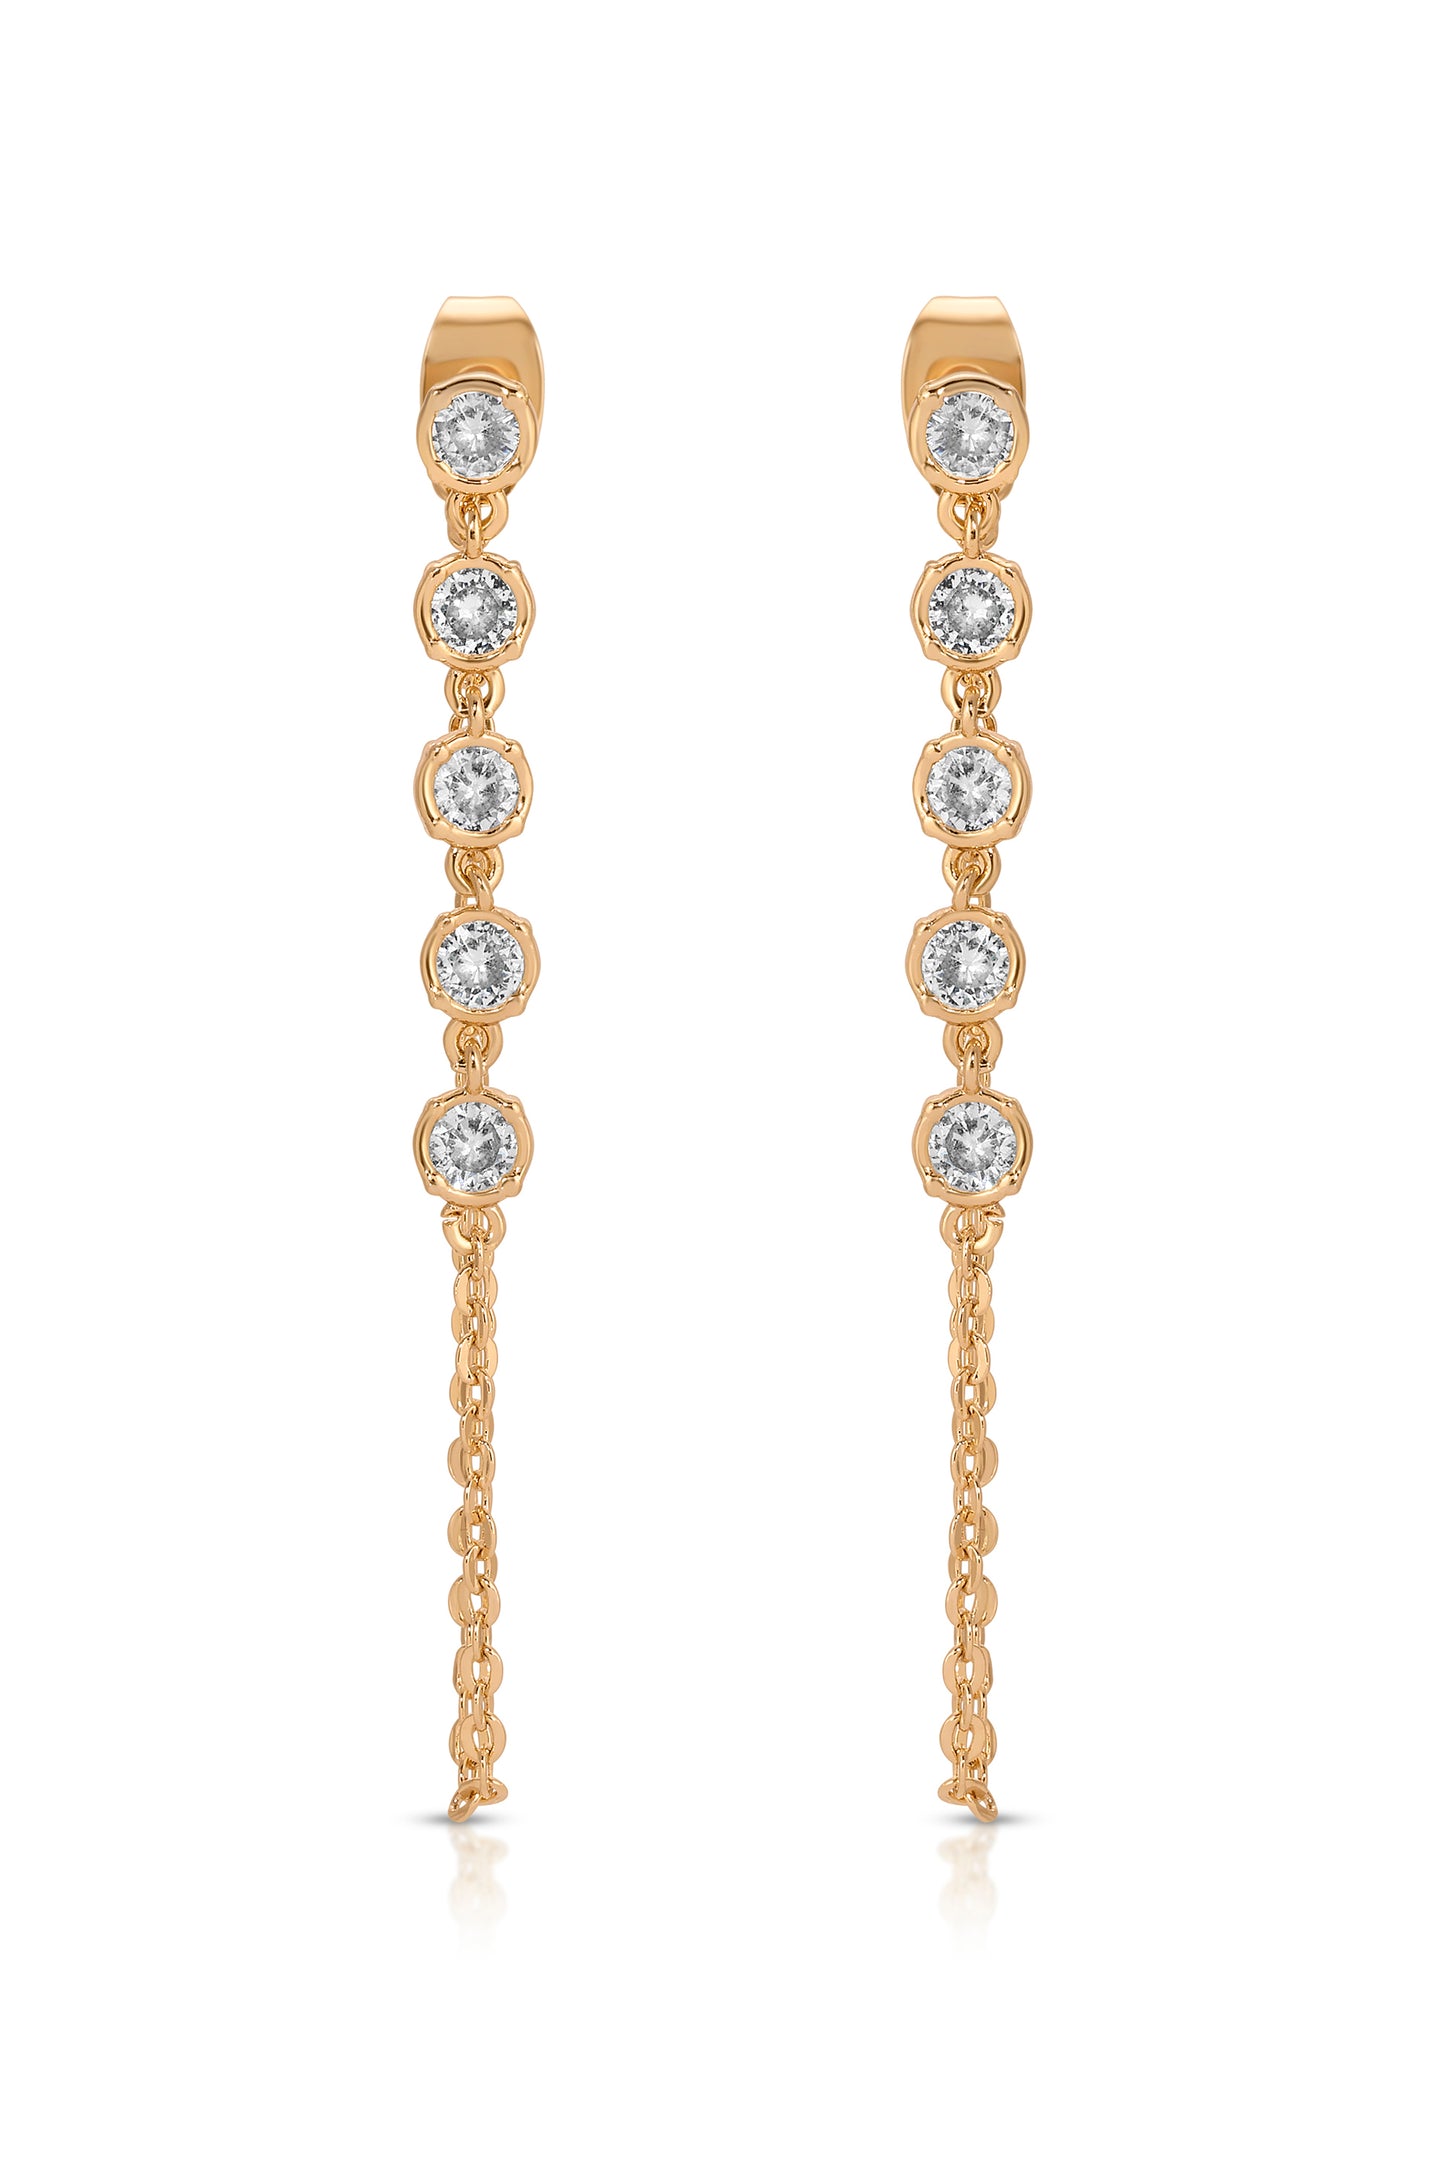 Crystal Chain Danglers 18k Gold Plated Earring front